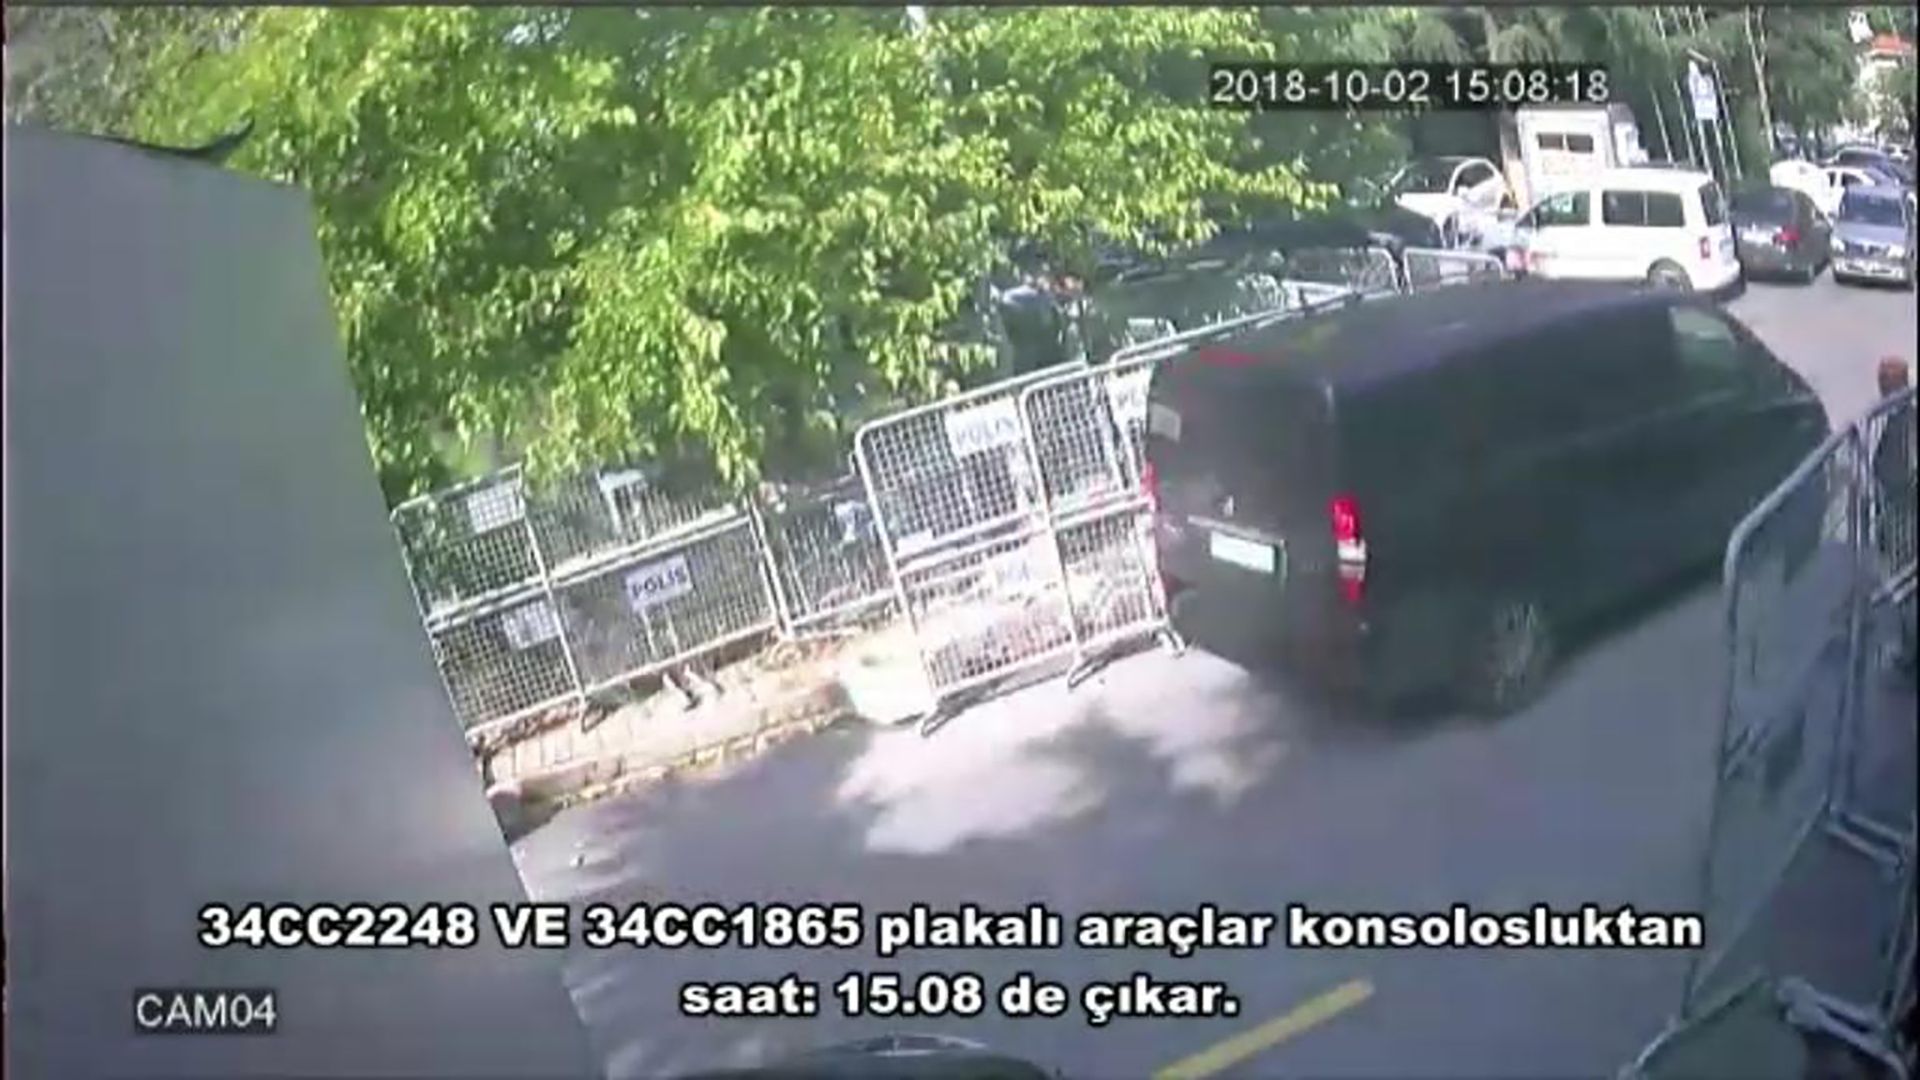 A police CCTV video allegedly shows a black van in front of the Saudi consulate in Istanbul on October 2 when journalist Jamal Khashoggi gone missing. Photo: Sabah Newspaper/AFP/Getty Images